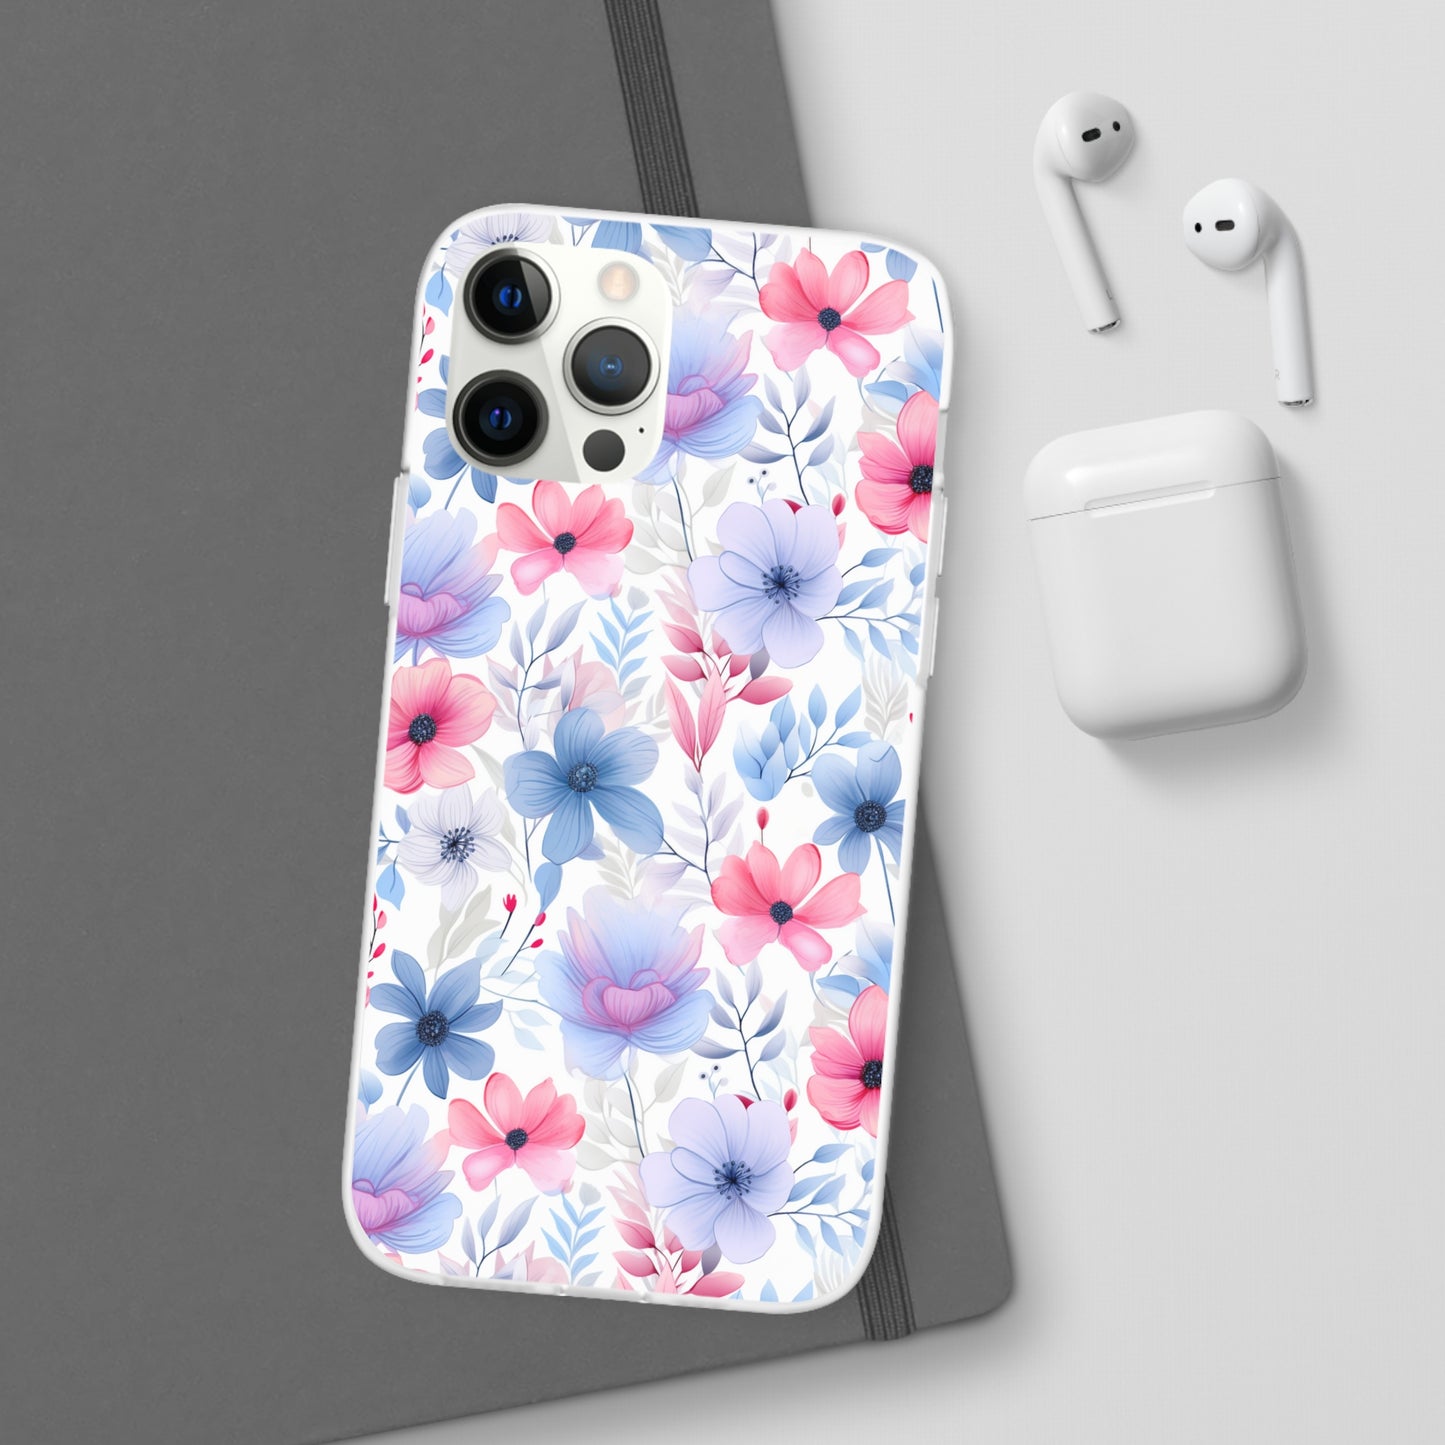 Floral Whispers - Soft Hues of Violets, Pinks, and Blues - Flexi Phone Case Phone Case Pattern Symphony iPhone 12 Pro  